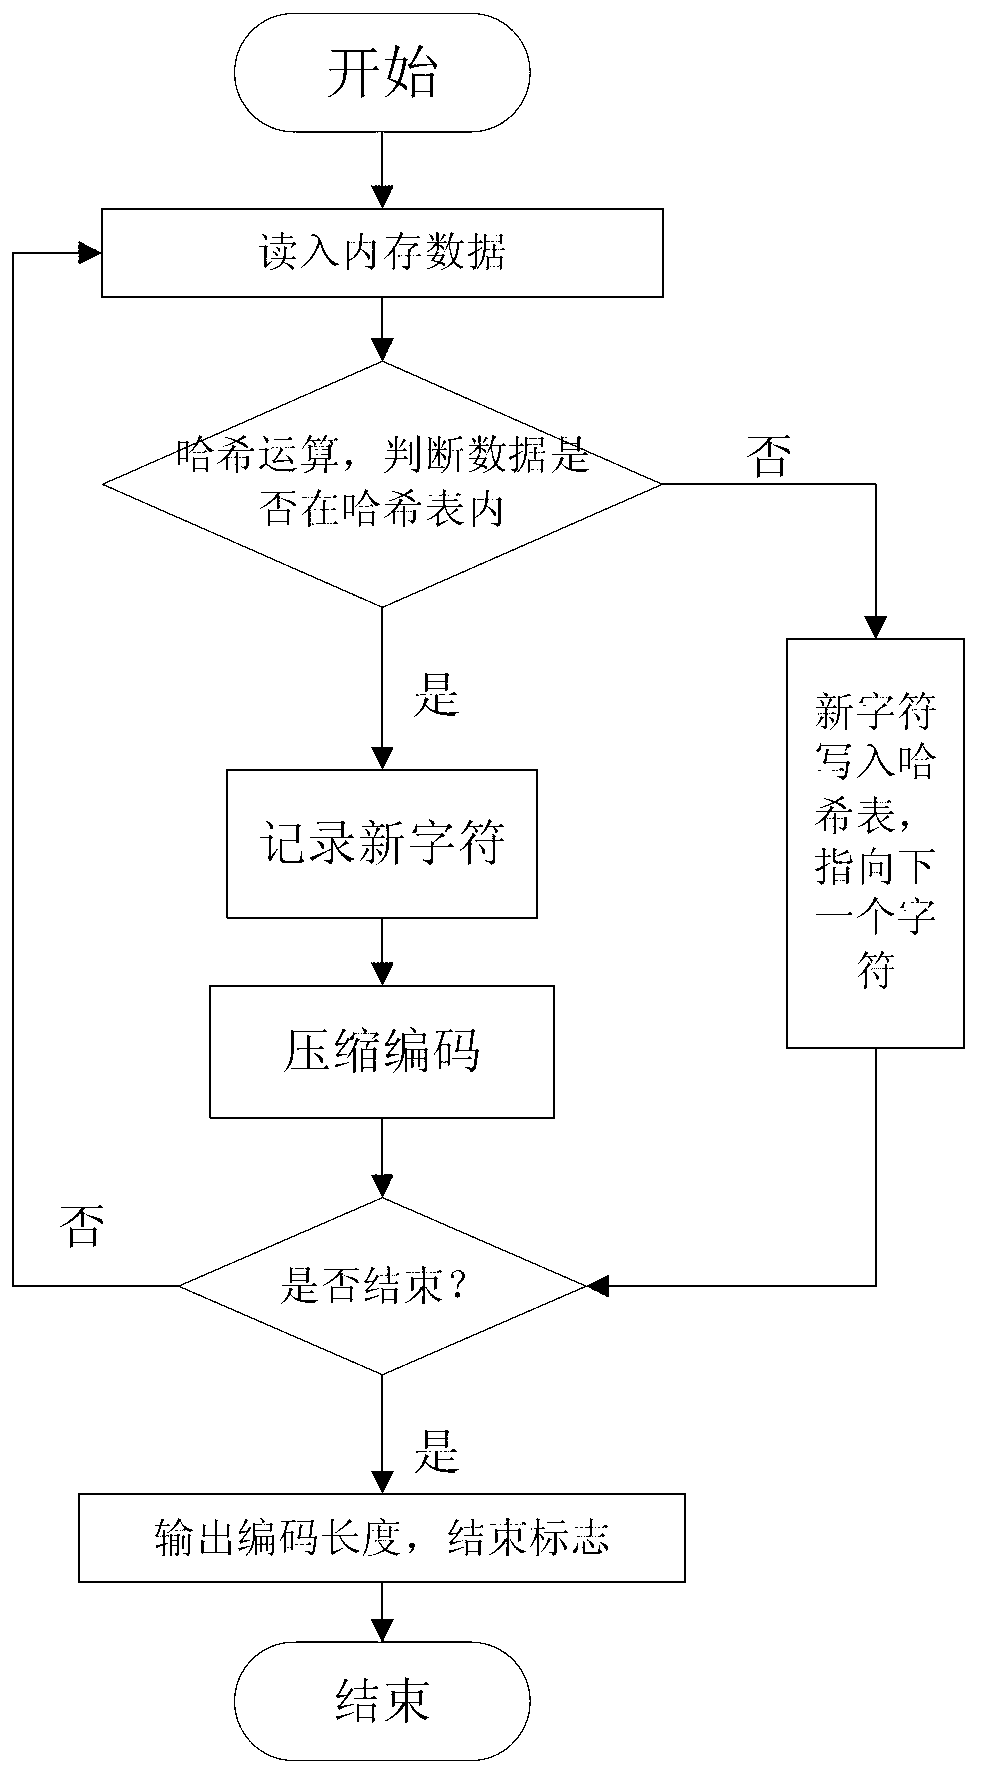 Mobile device memory compression method based on dictionary encoding and run-length encoding